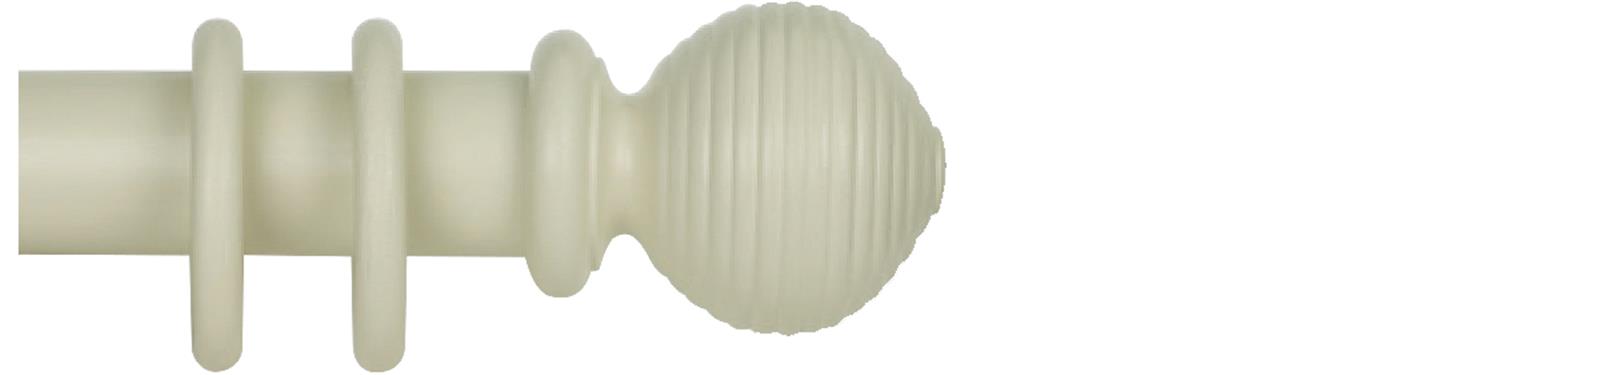 Cameron Fuller 63mm Pole Ivory Beehive